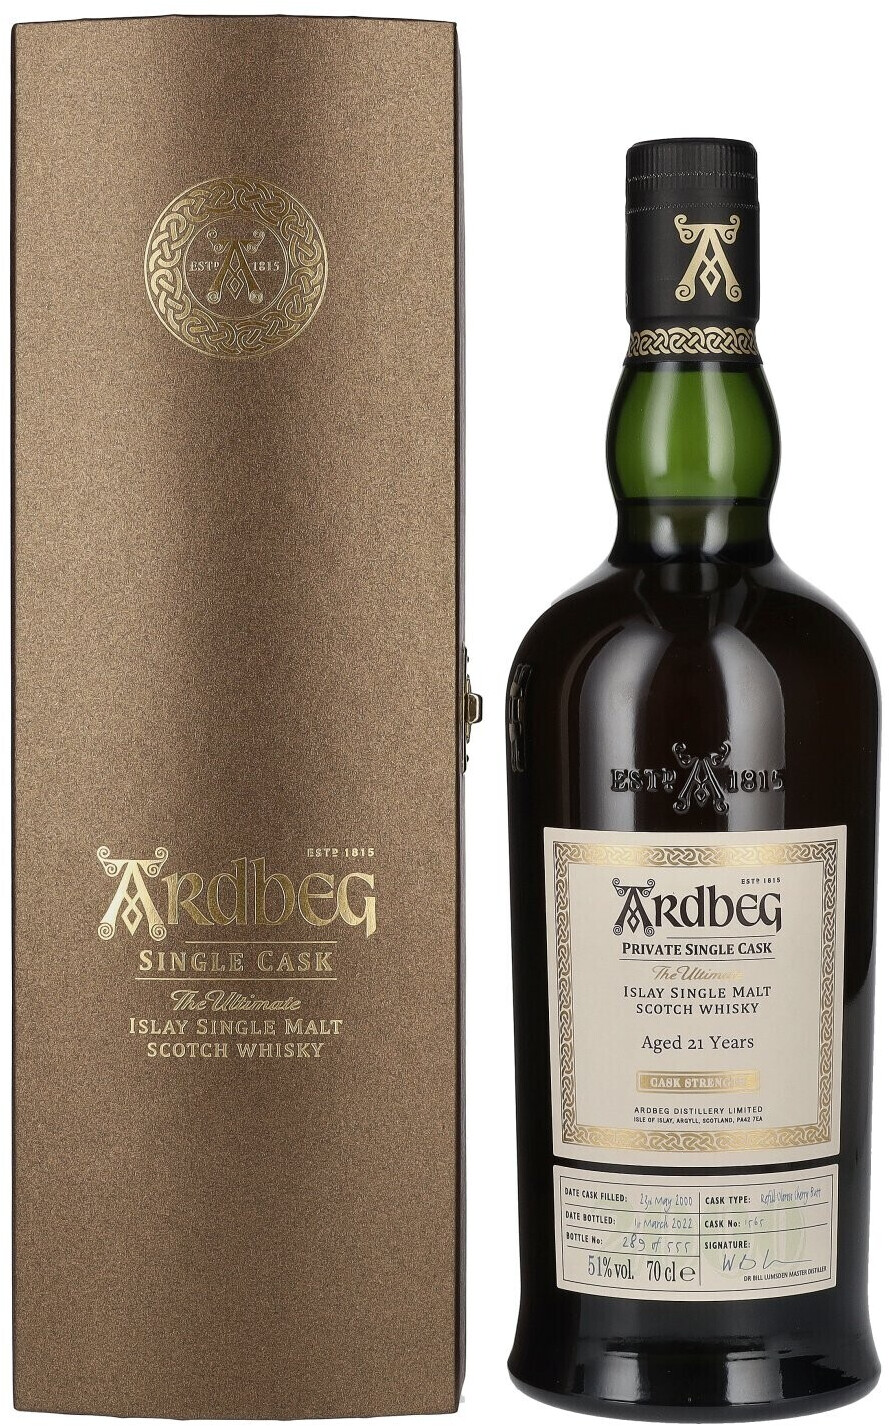 Preisvergleich ab Whisky Single 21 | 51% Ultimate The bei Private Cask Ardbeg 2.087,91 € Years 0,7l Old